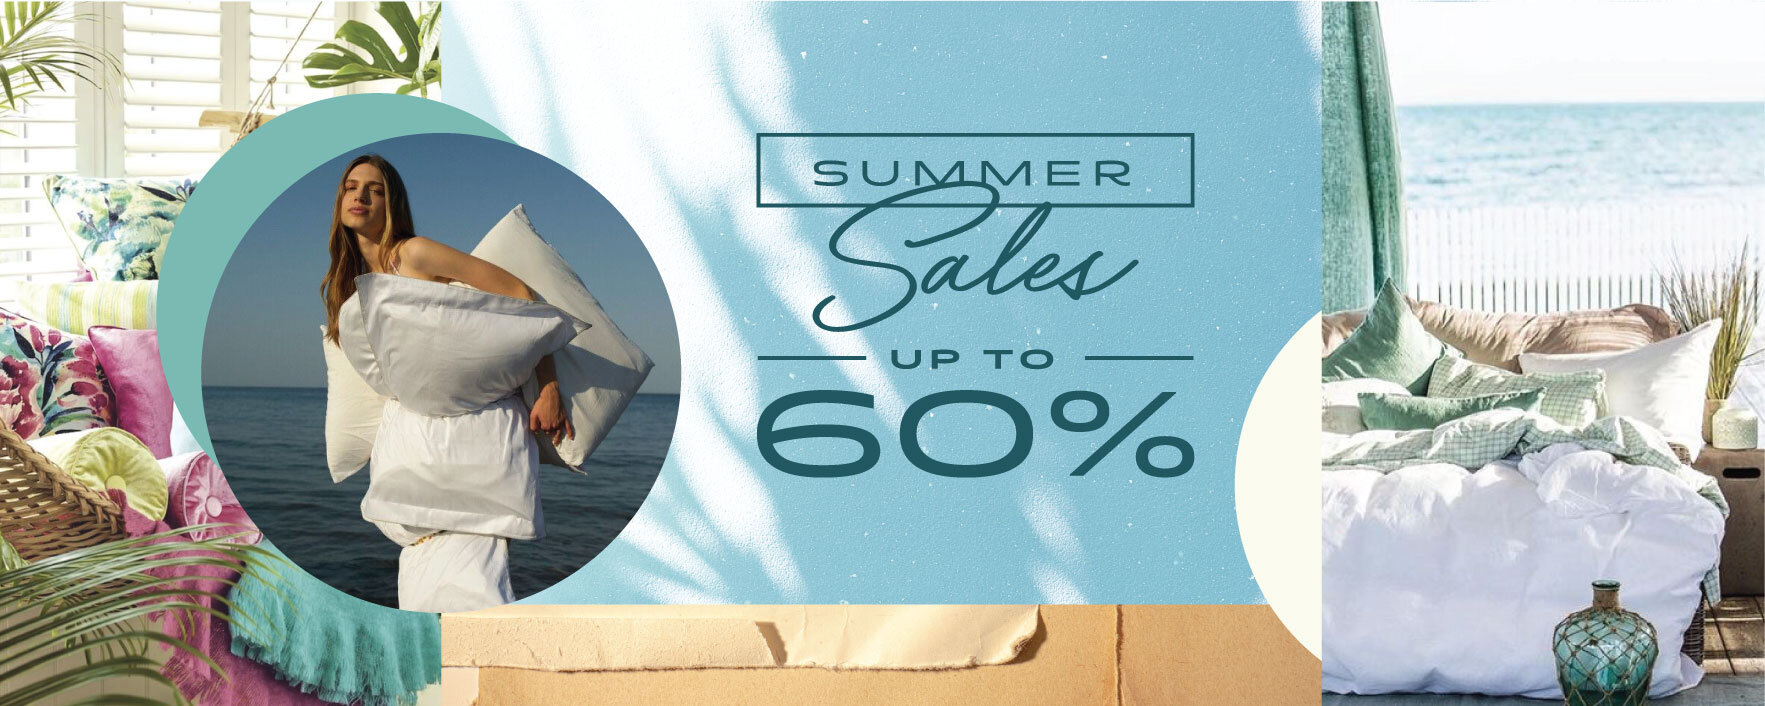 SUMMER SALES - UP TO 60%